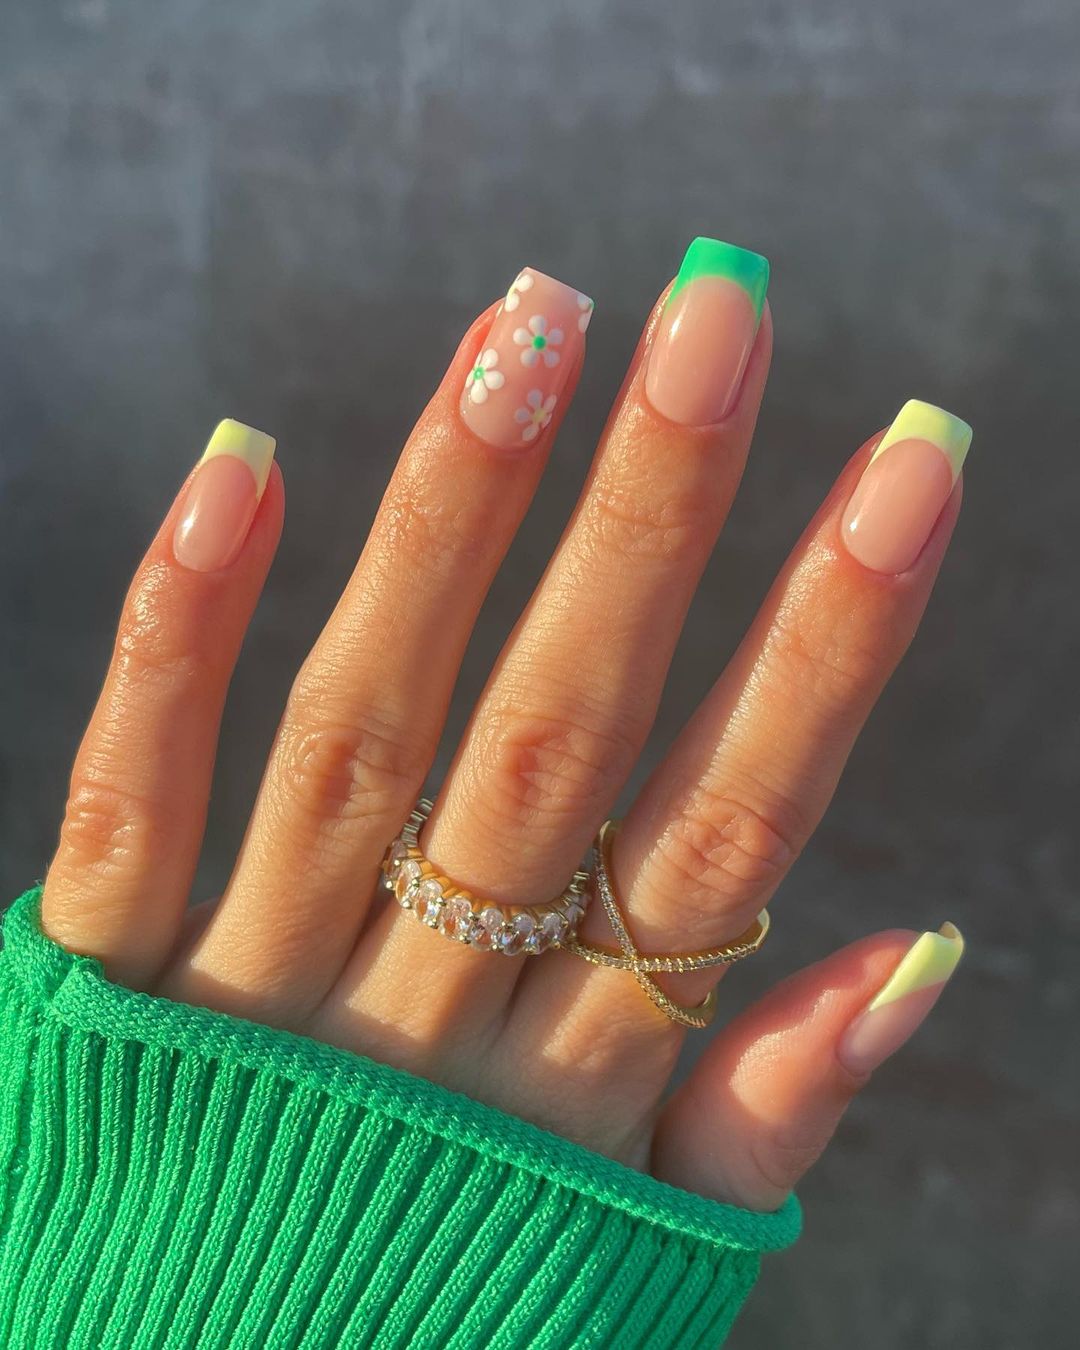 The 11 Nail Trends That Will Be Everywhere, According to Experts